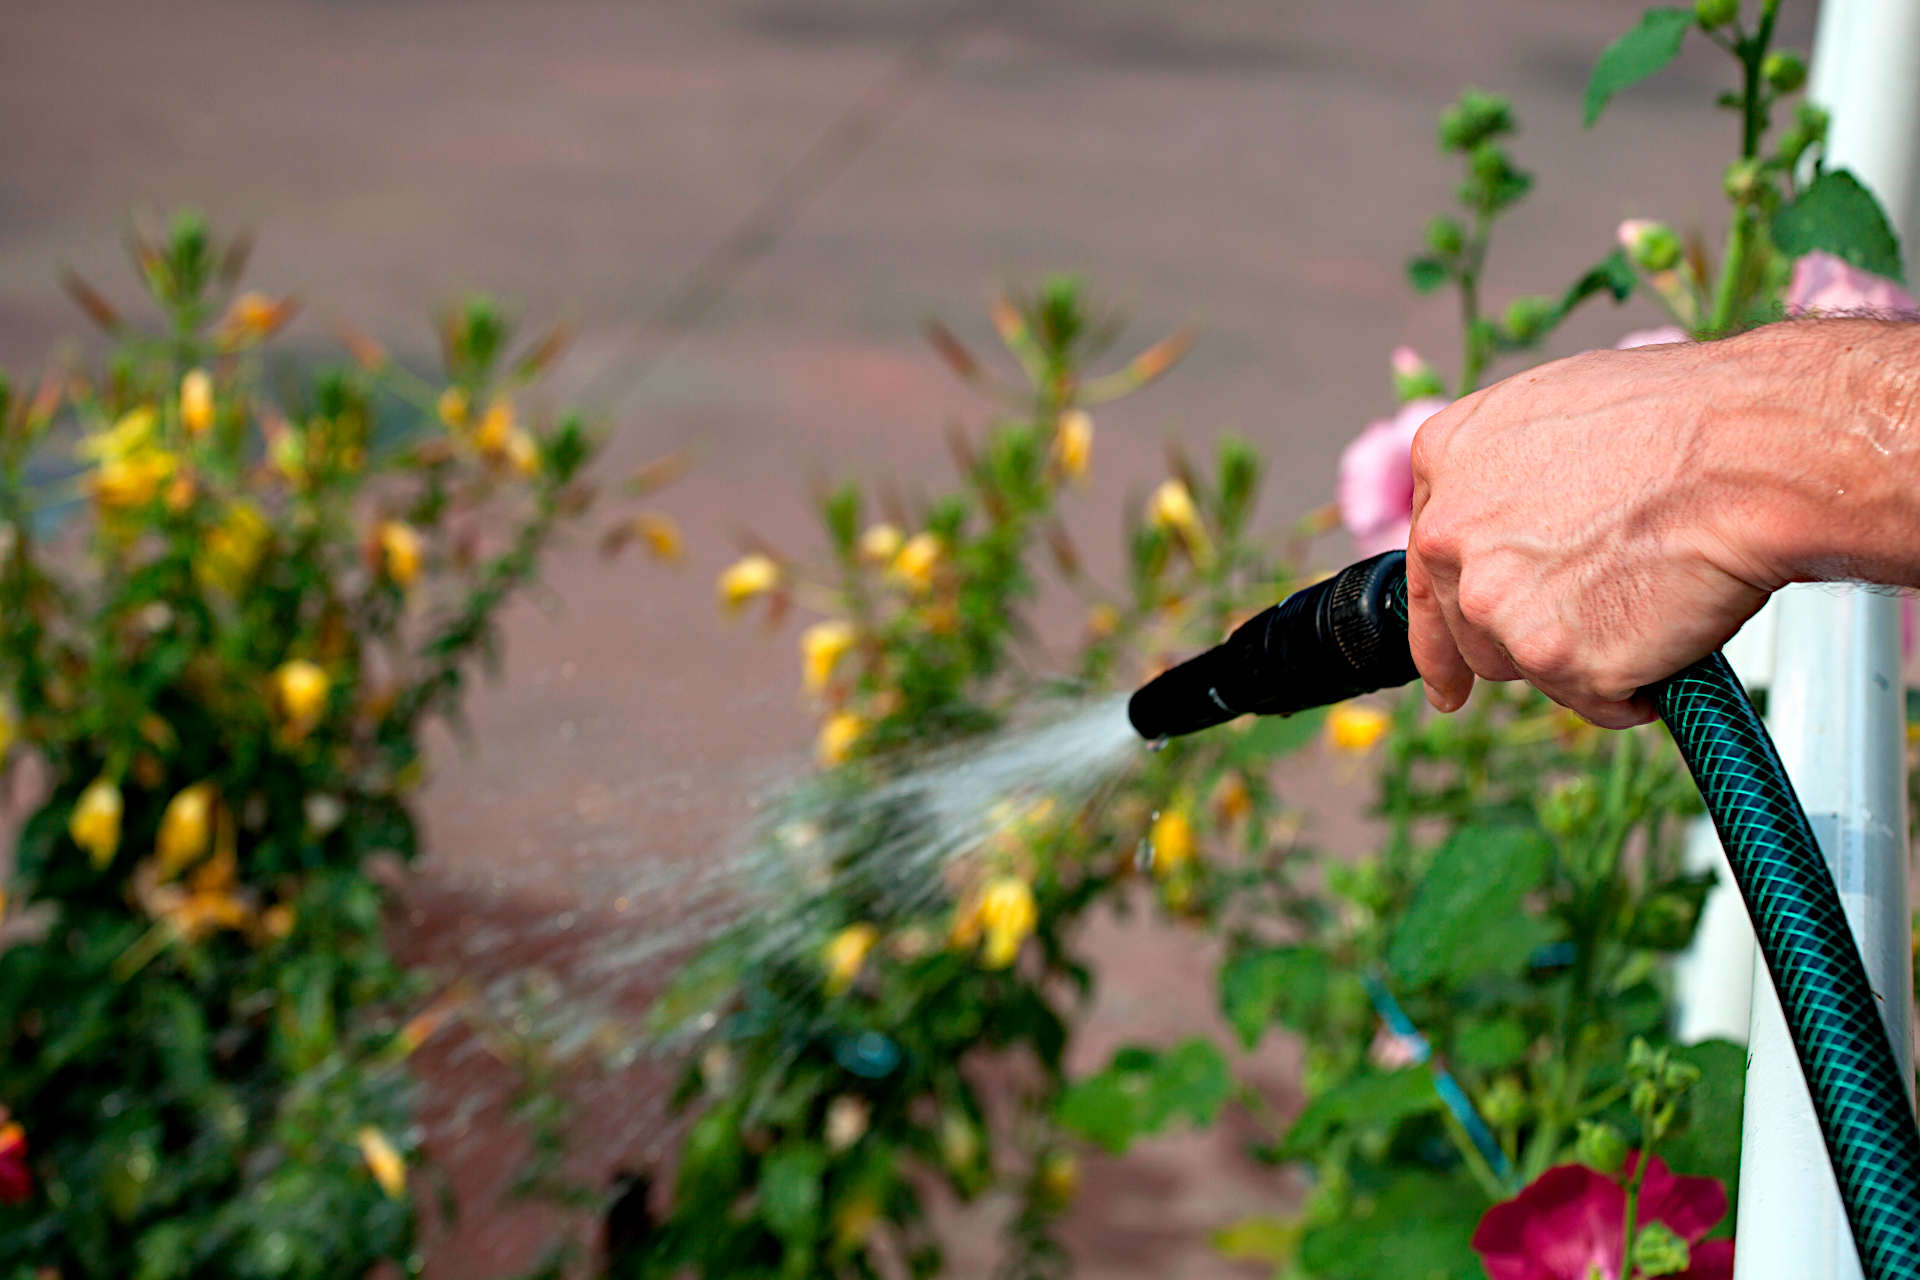 july gardening tasks - Give priority to your watering tasks